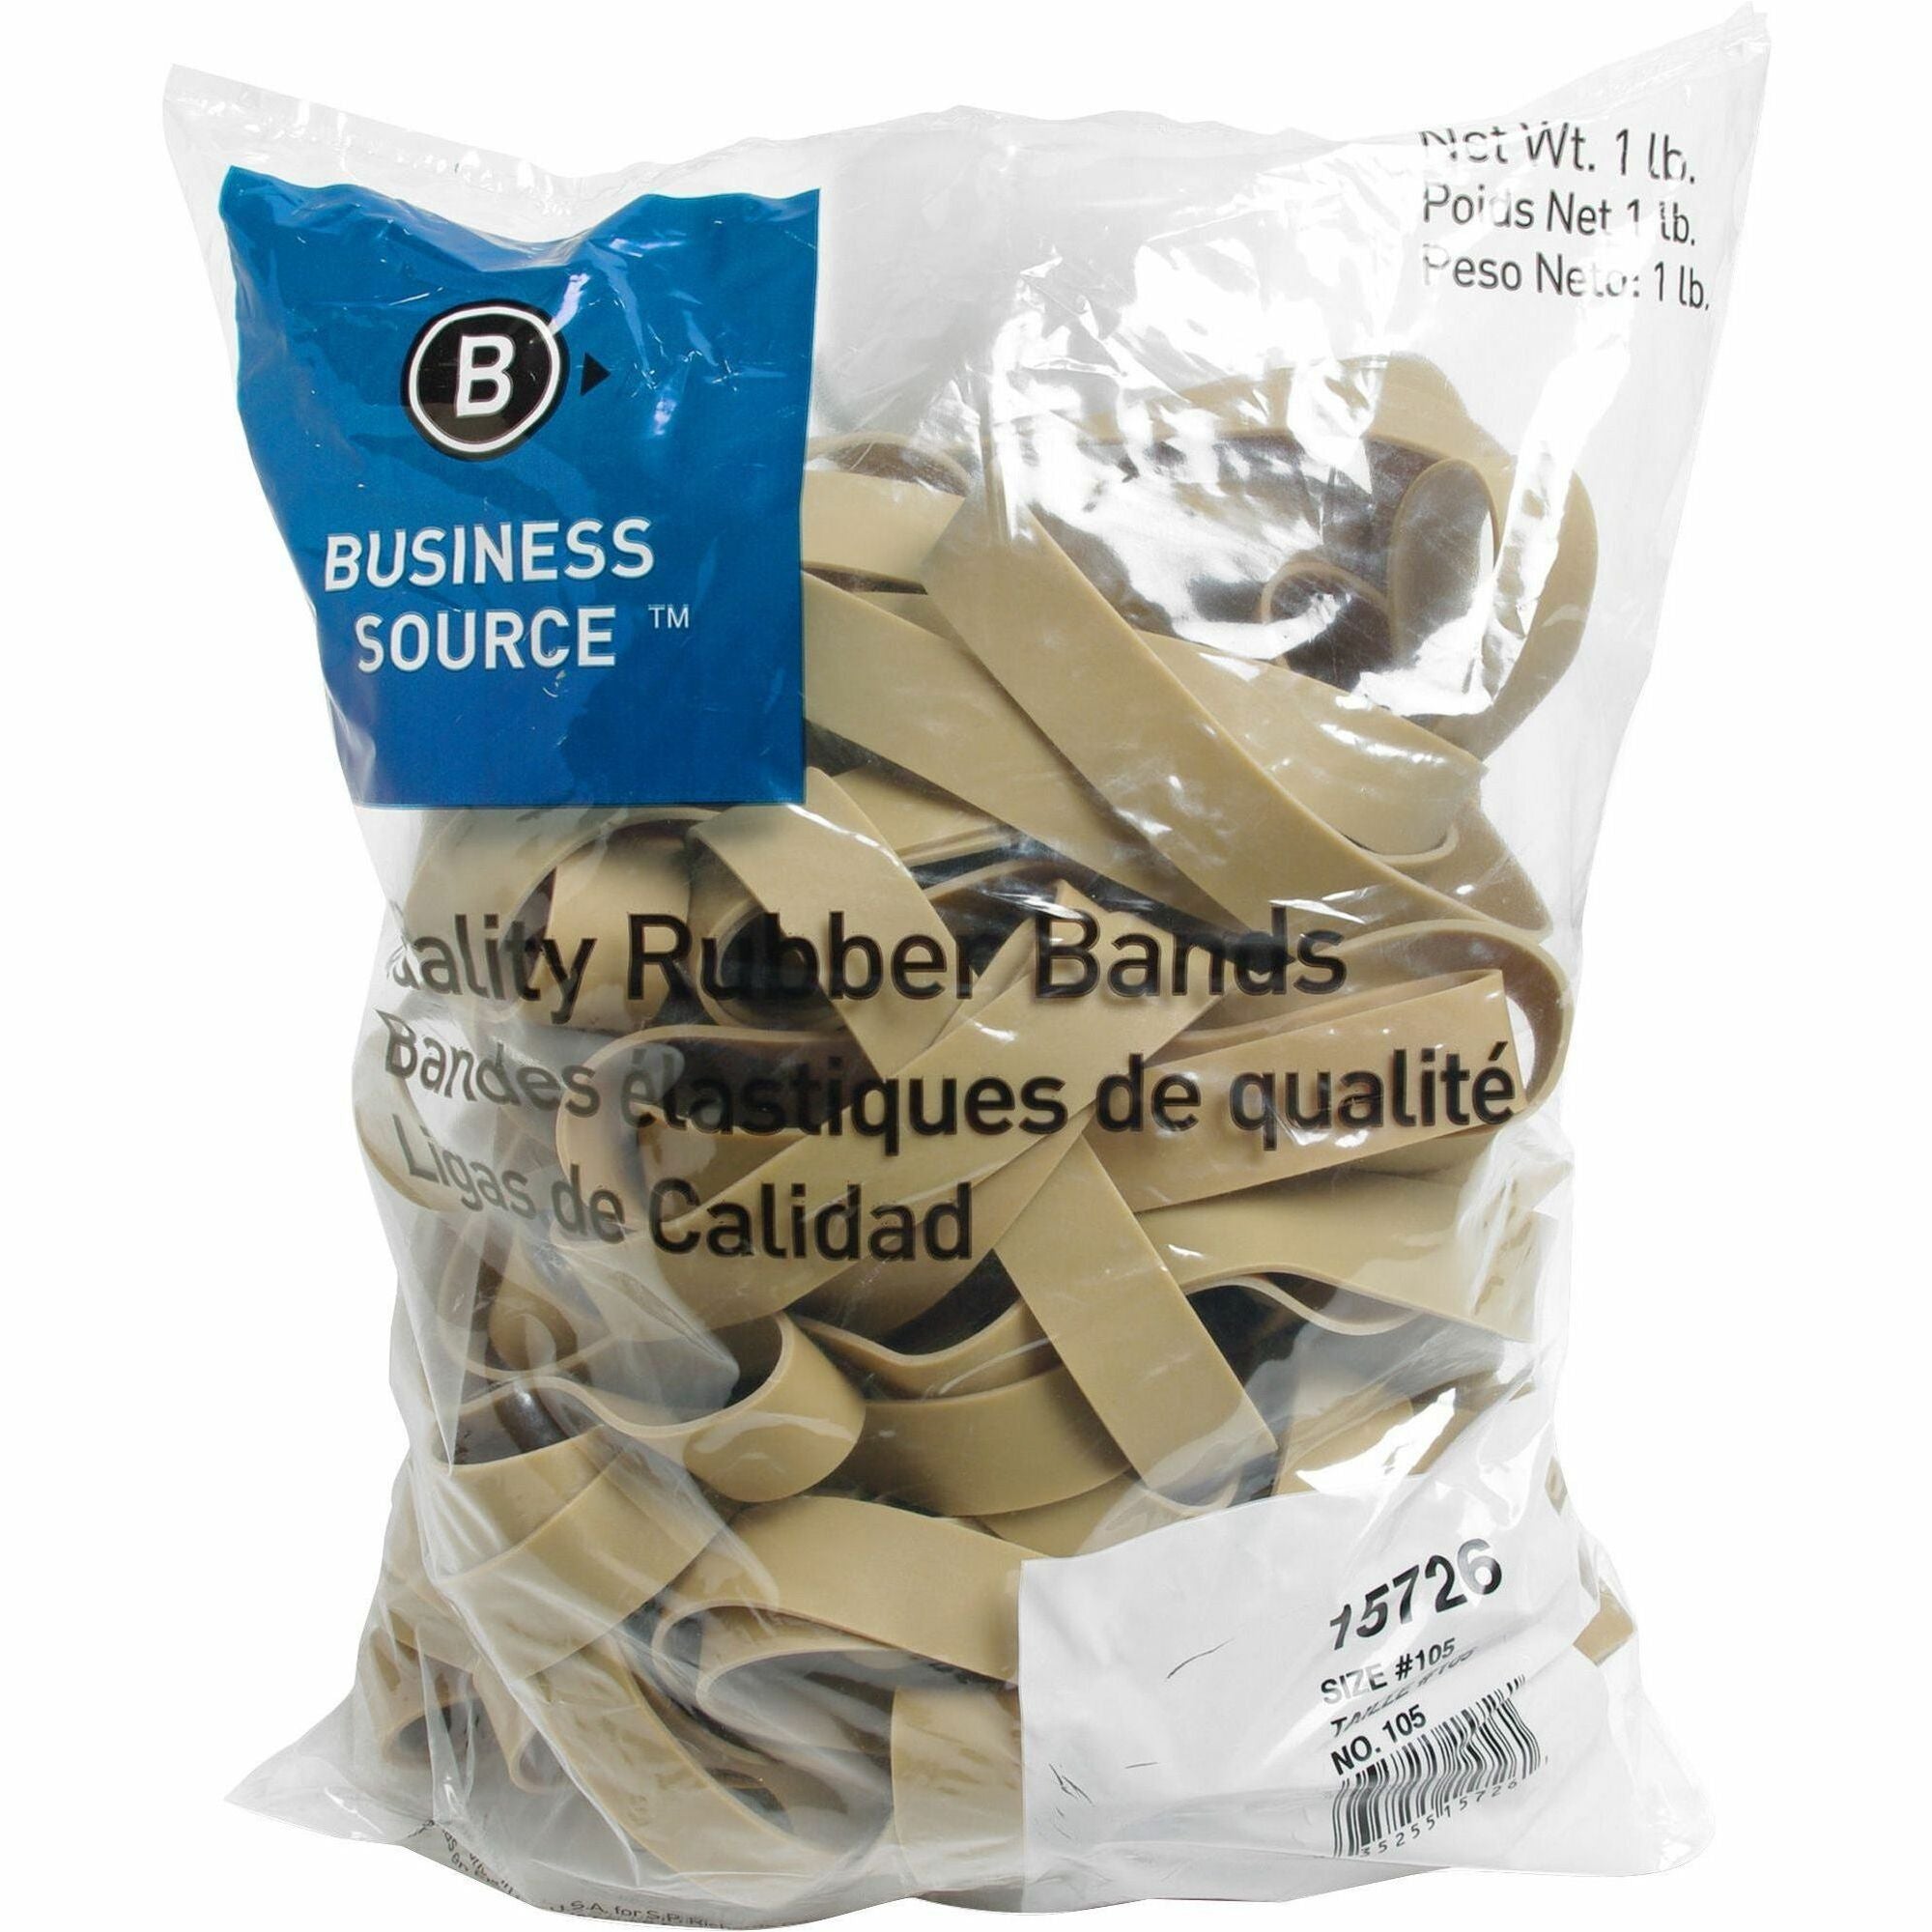 Business Source Quality Rubber Bands - Size: #105 - 5" Length x 0.6" Width - Sustainable - 60 / Pack - Rubber - Crepe - 